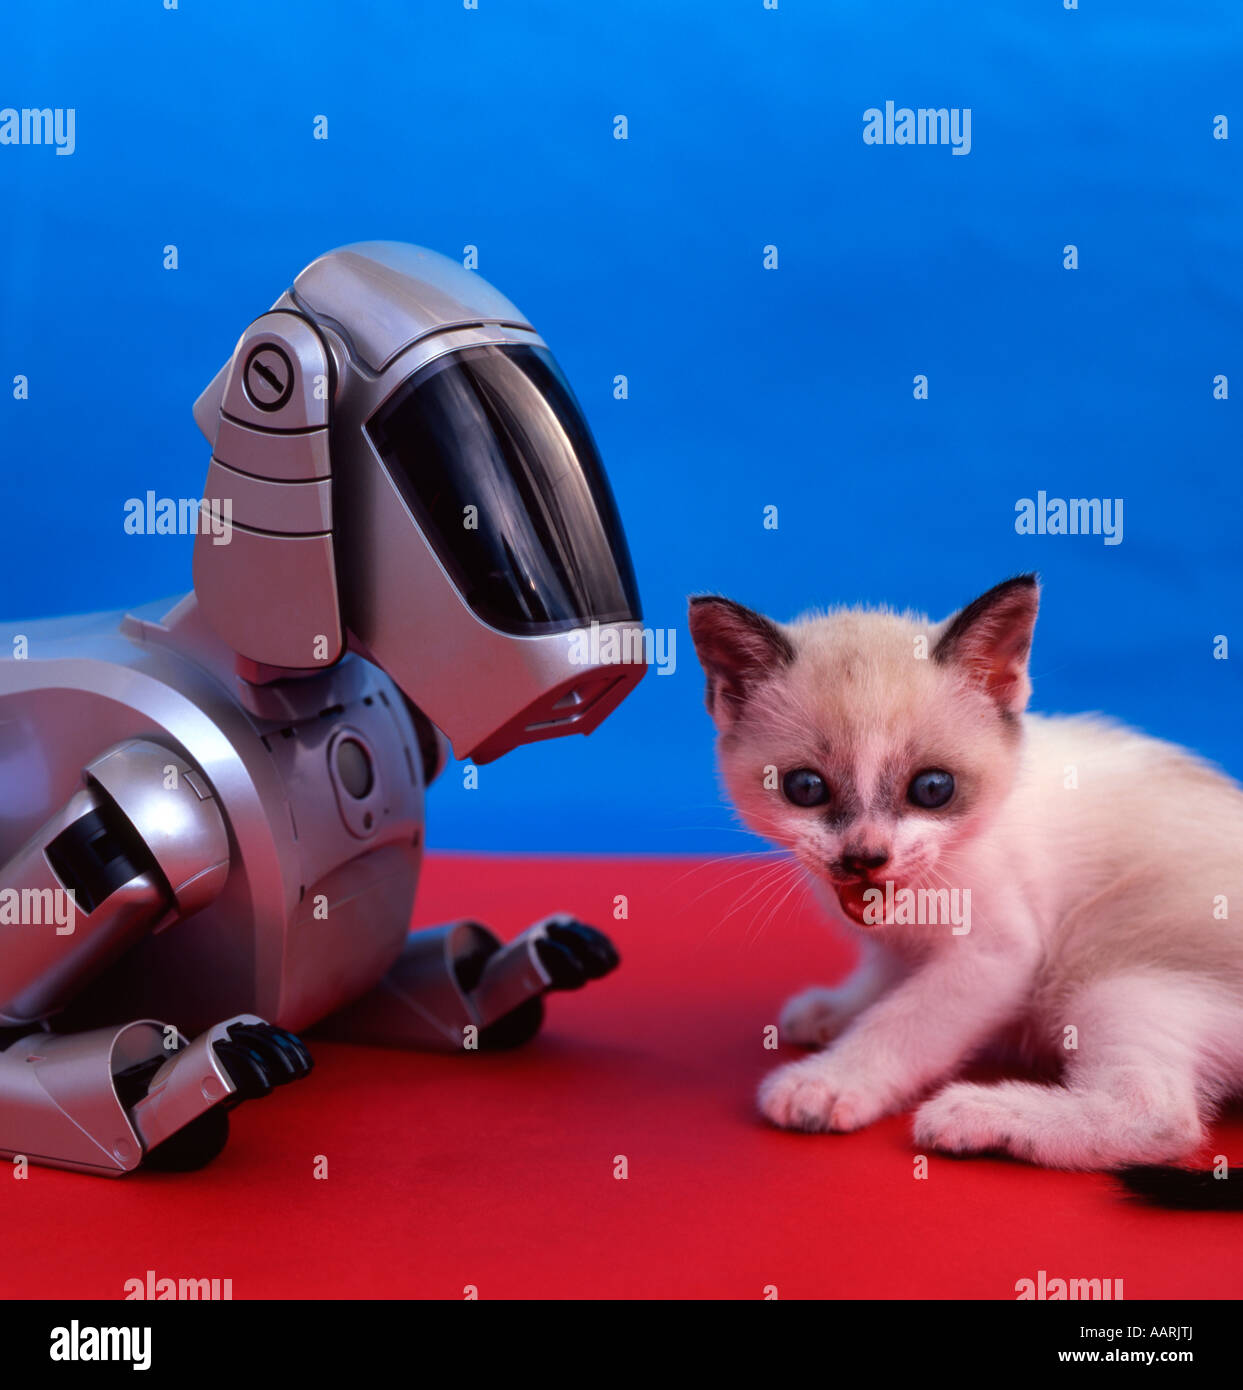 Sony AIBO ( Artificial Intelligence roBOt ) autonomous robot, First  generation model ( ERS-110 ERS-111 ) with kitten Stock Photo - Alamy